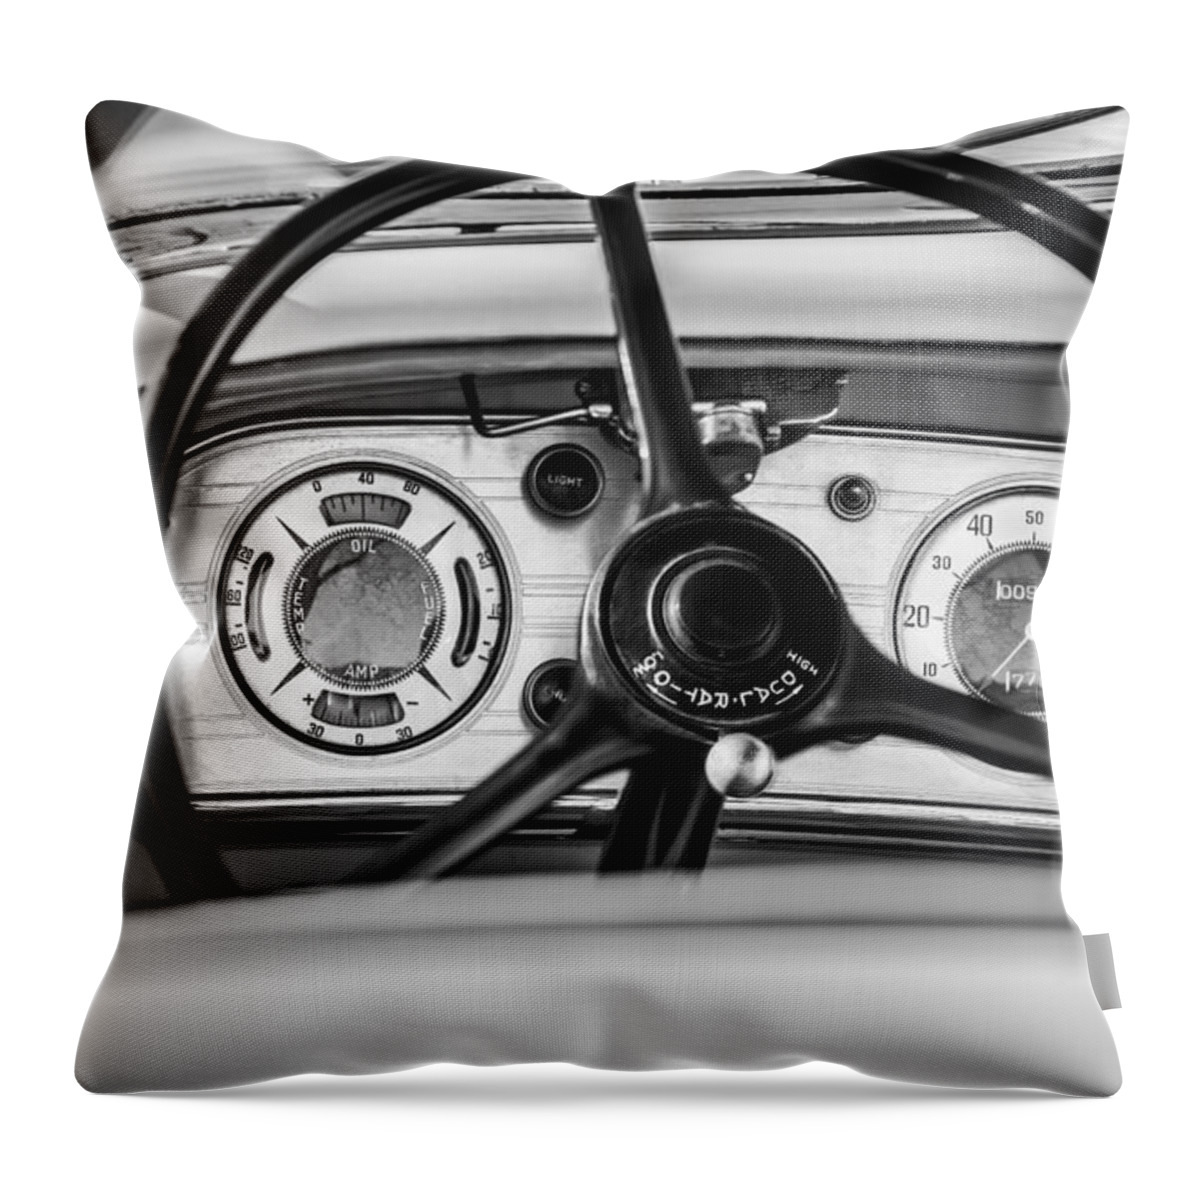 1935 Auburn 851 Supercharged Boattail Speedster Steering Wheel Throw Pillow featuring the photograph 1935 Auburn 851 Supercharged Boattail Speedster Steering Wheel -0862bw by Jill Reger